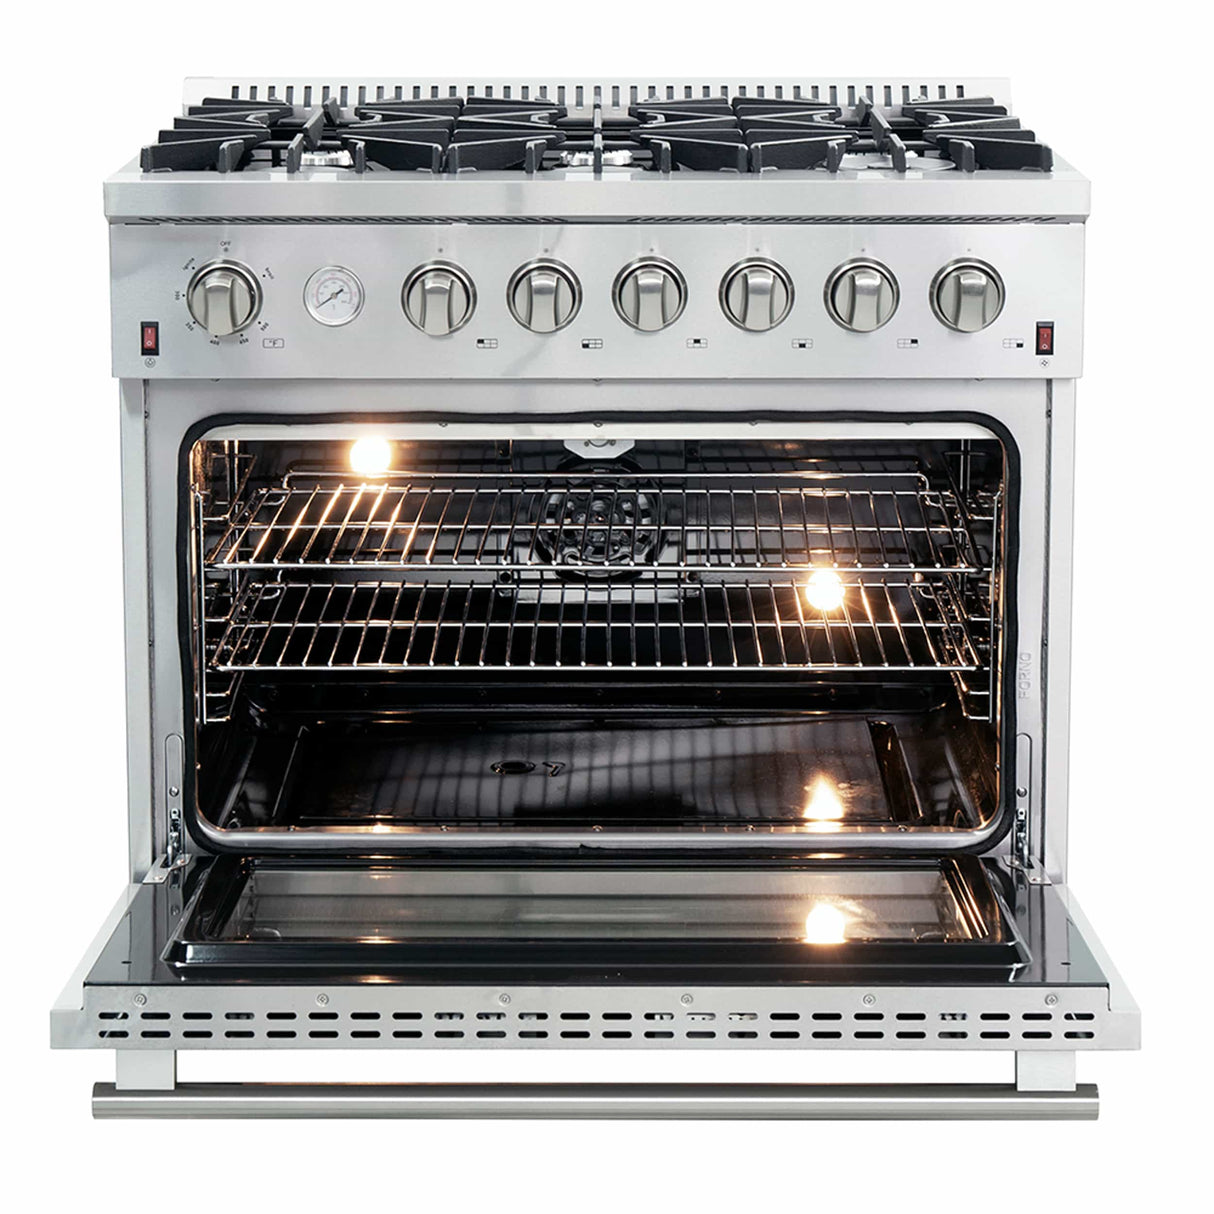 Forno 36-Inch Alta Qualita Gas Range with 6 Gas Burners, Gas Oven, Temperature Gauge, and Airfryer Accessories in Stainless Steel (FFSGS6291-36)